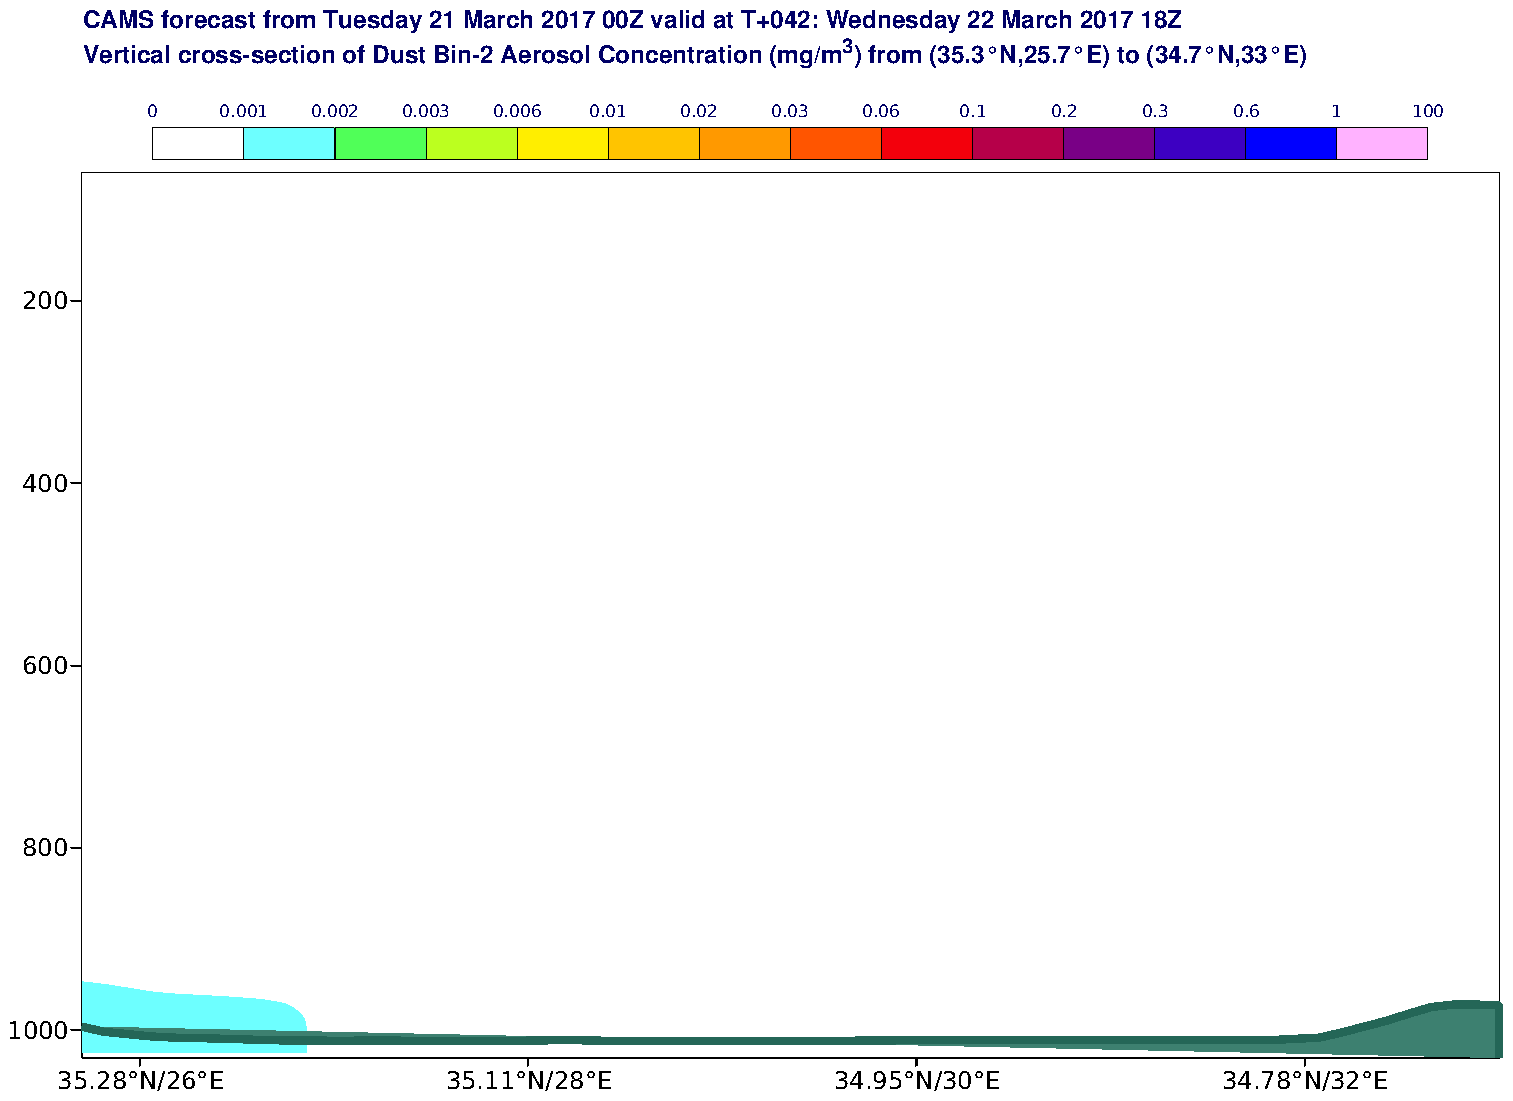 Vertical cross-section of Dust Bin-2 Aerosol Concentration (mg/m3) valid at T42 - 2017-03-22 18:00